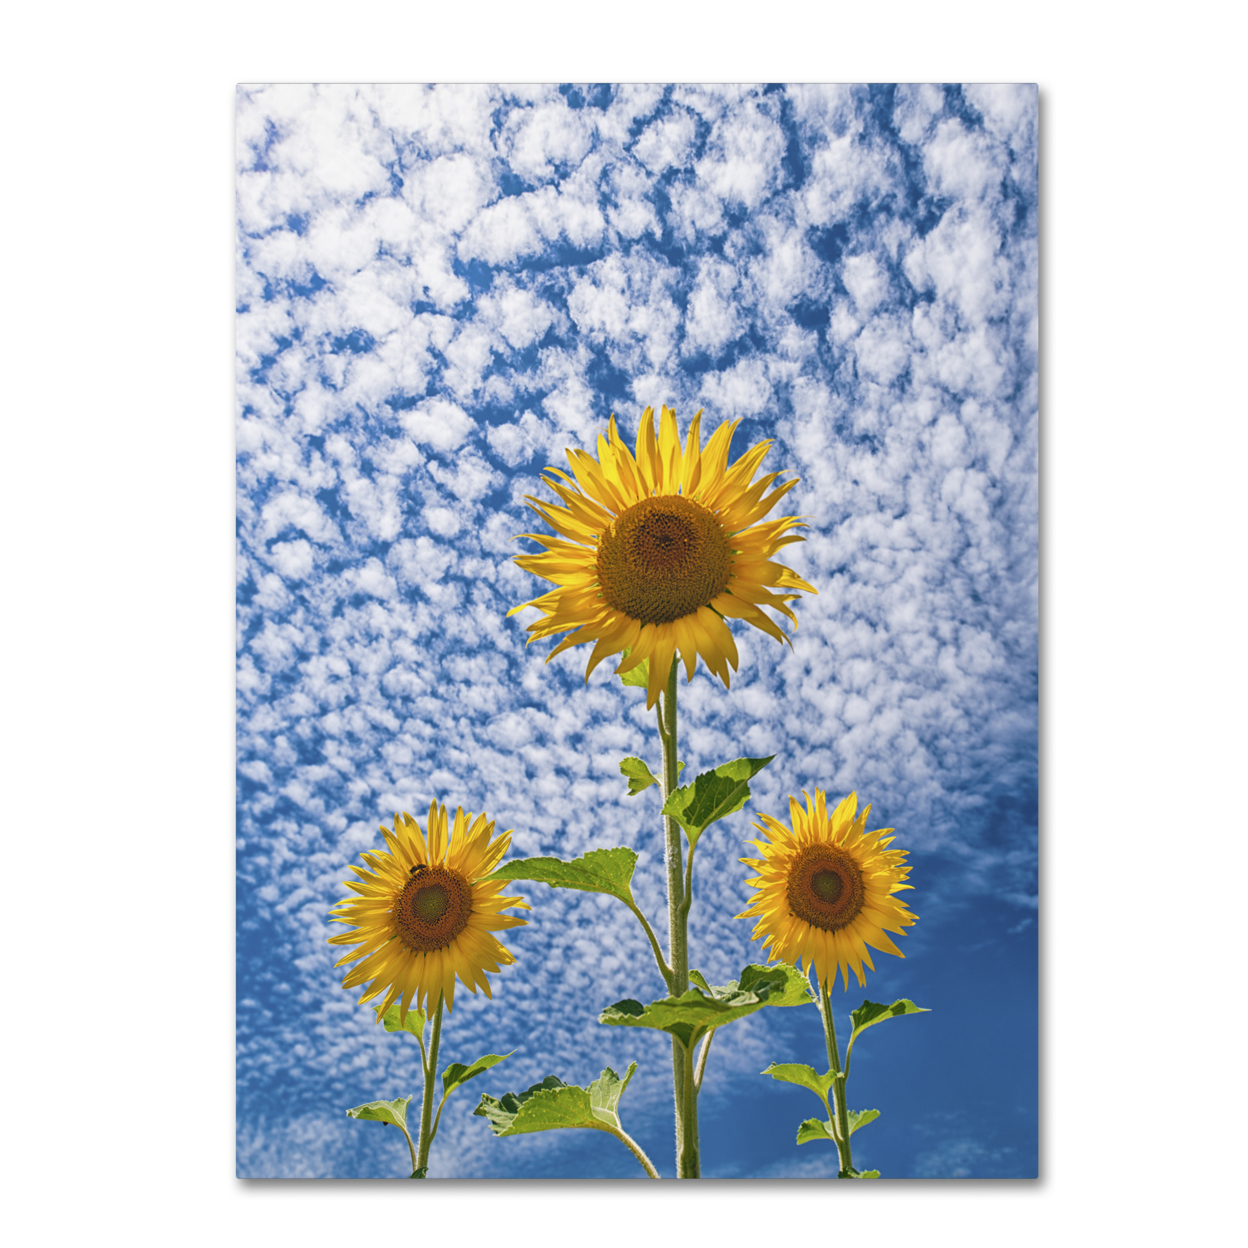 Michael Blanchette Photography 'Sunflower Triad' Canvas Wall Art 35 X 47 Inches